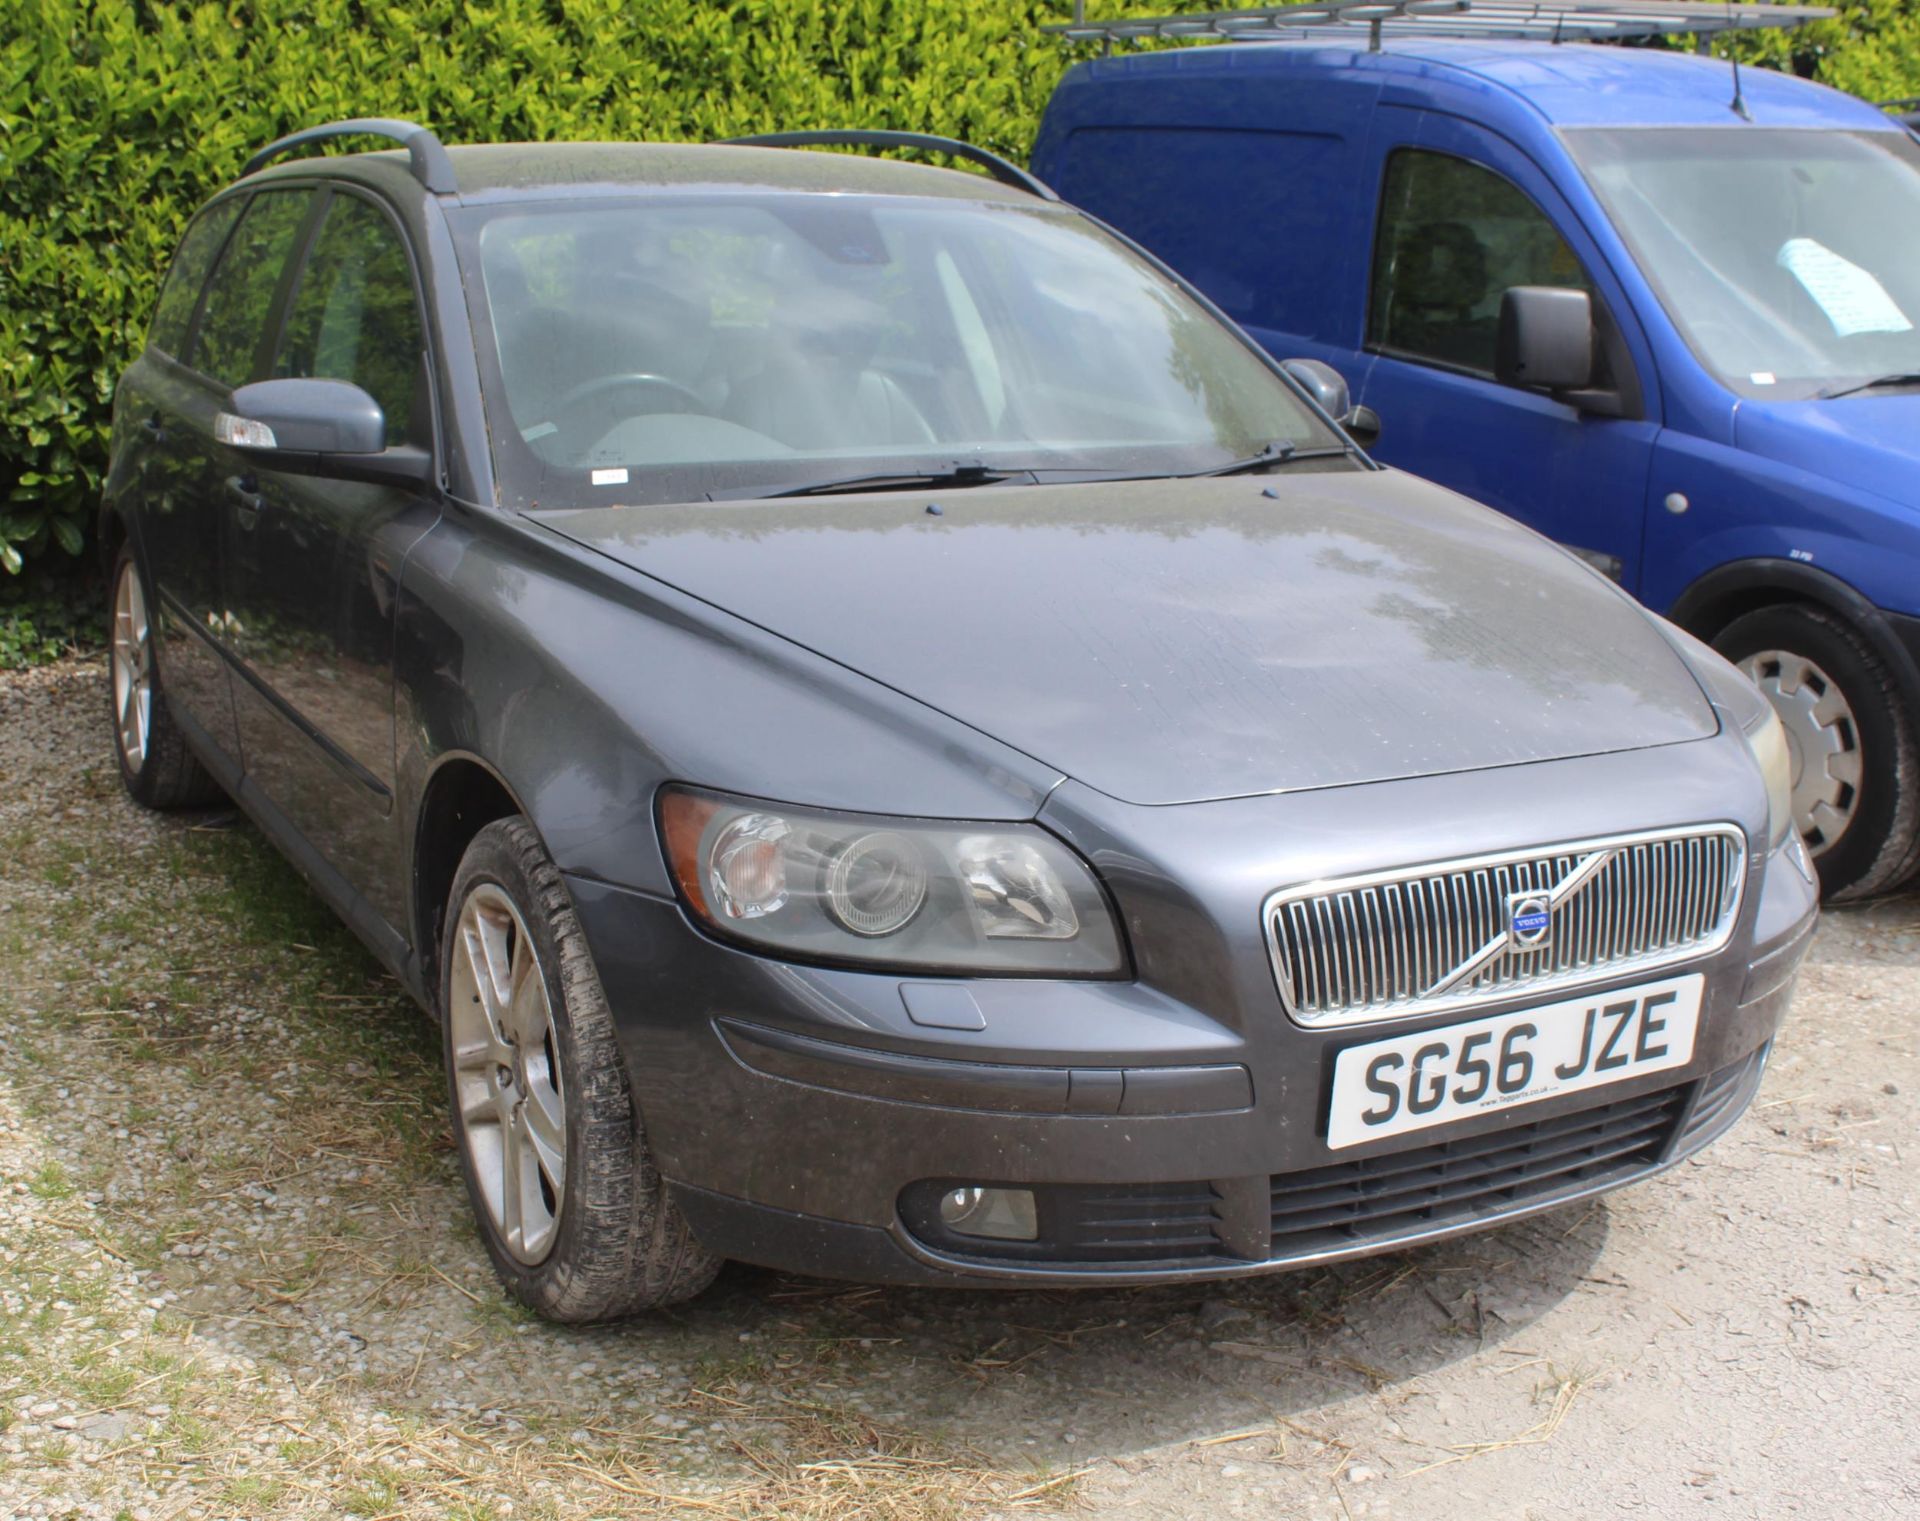 VOLVO V50 1.8 SG56JZE MANUAL PETROL APPROX 105000 MILES 12 MONTHS MOT NEW TYRES ON / WHEEL